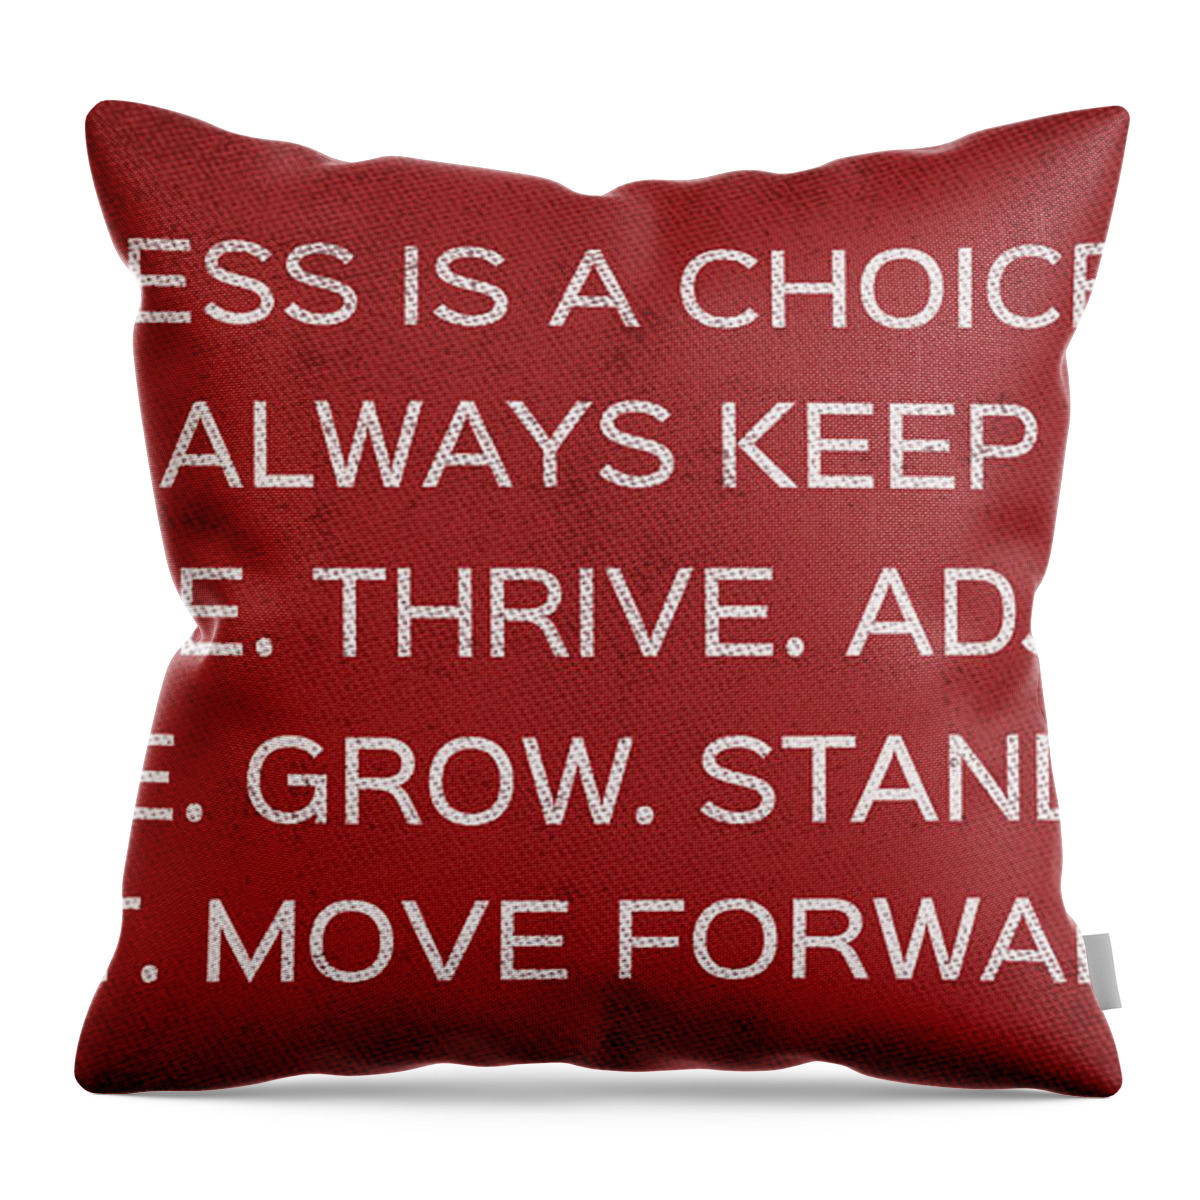 Happiness Throw Pillow featuring the digital art Happiness Is A Choice by Sd Graphics Studio